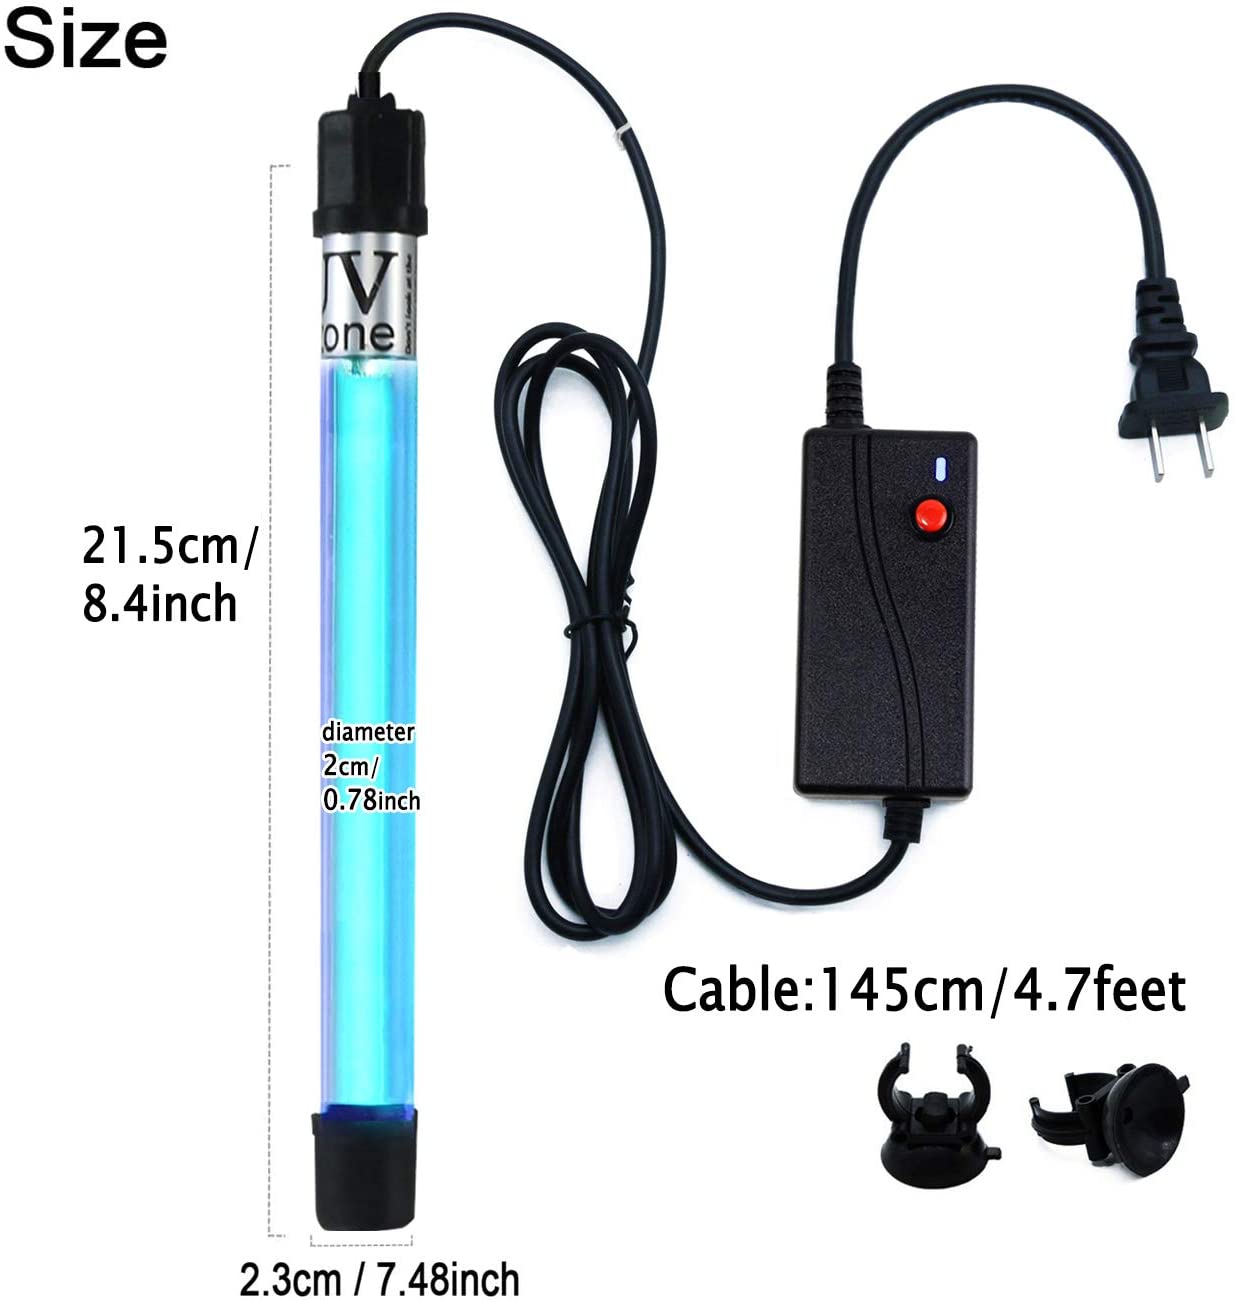 UVC with Ozone Wand Waterproof /Timer Control /7w Ultraviolet 110v, for Remove Musty